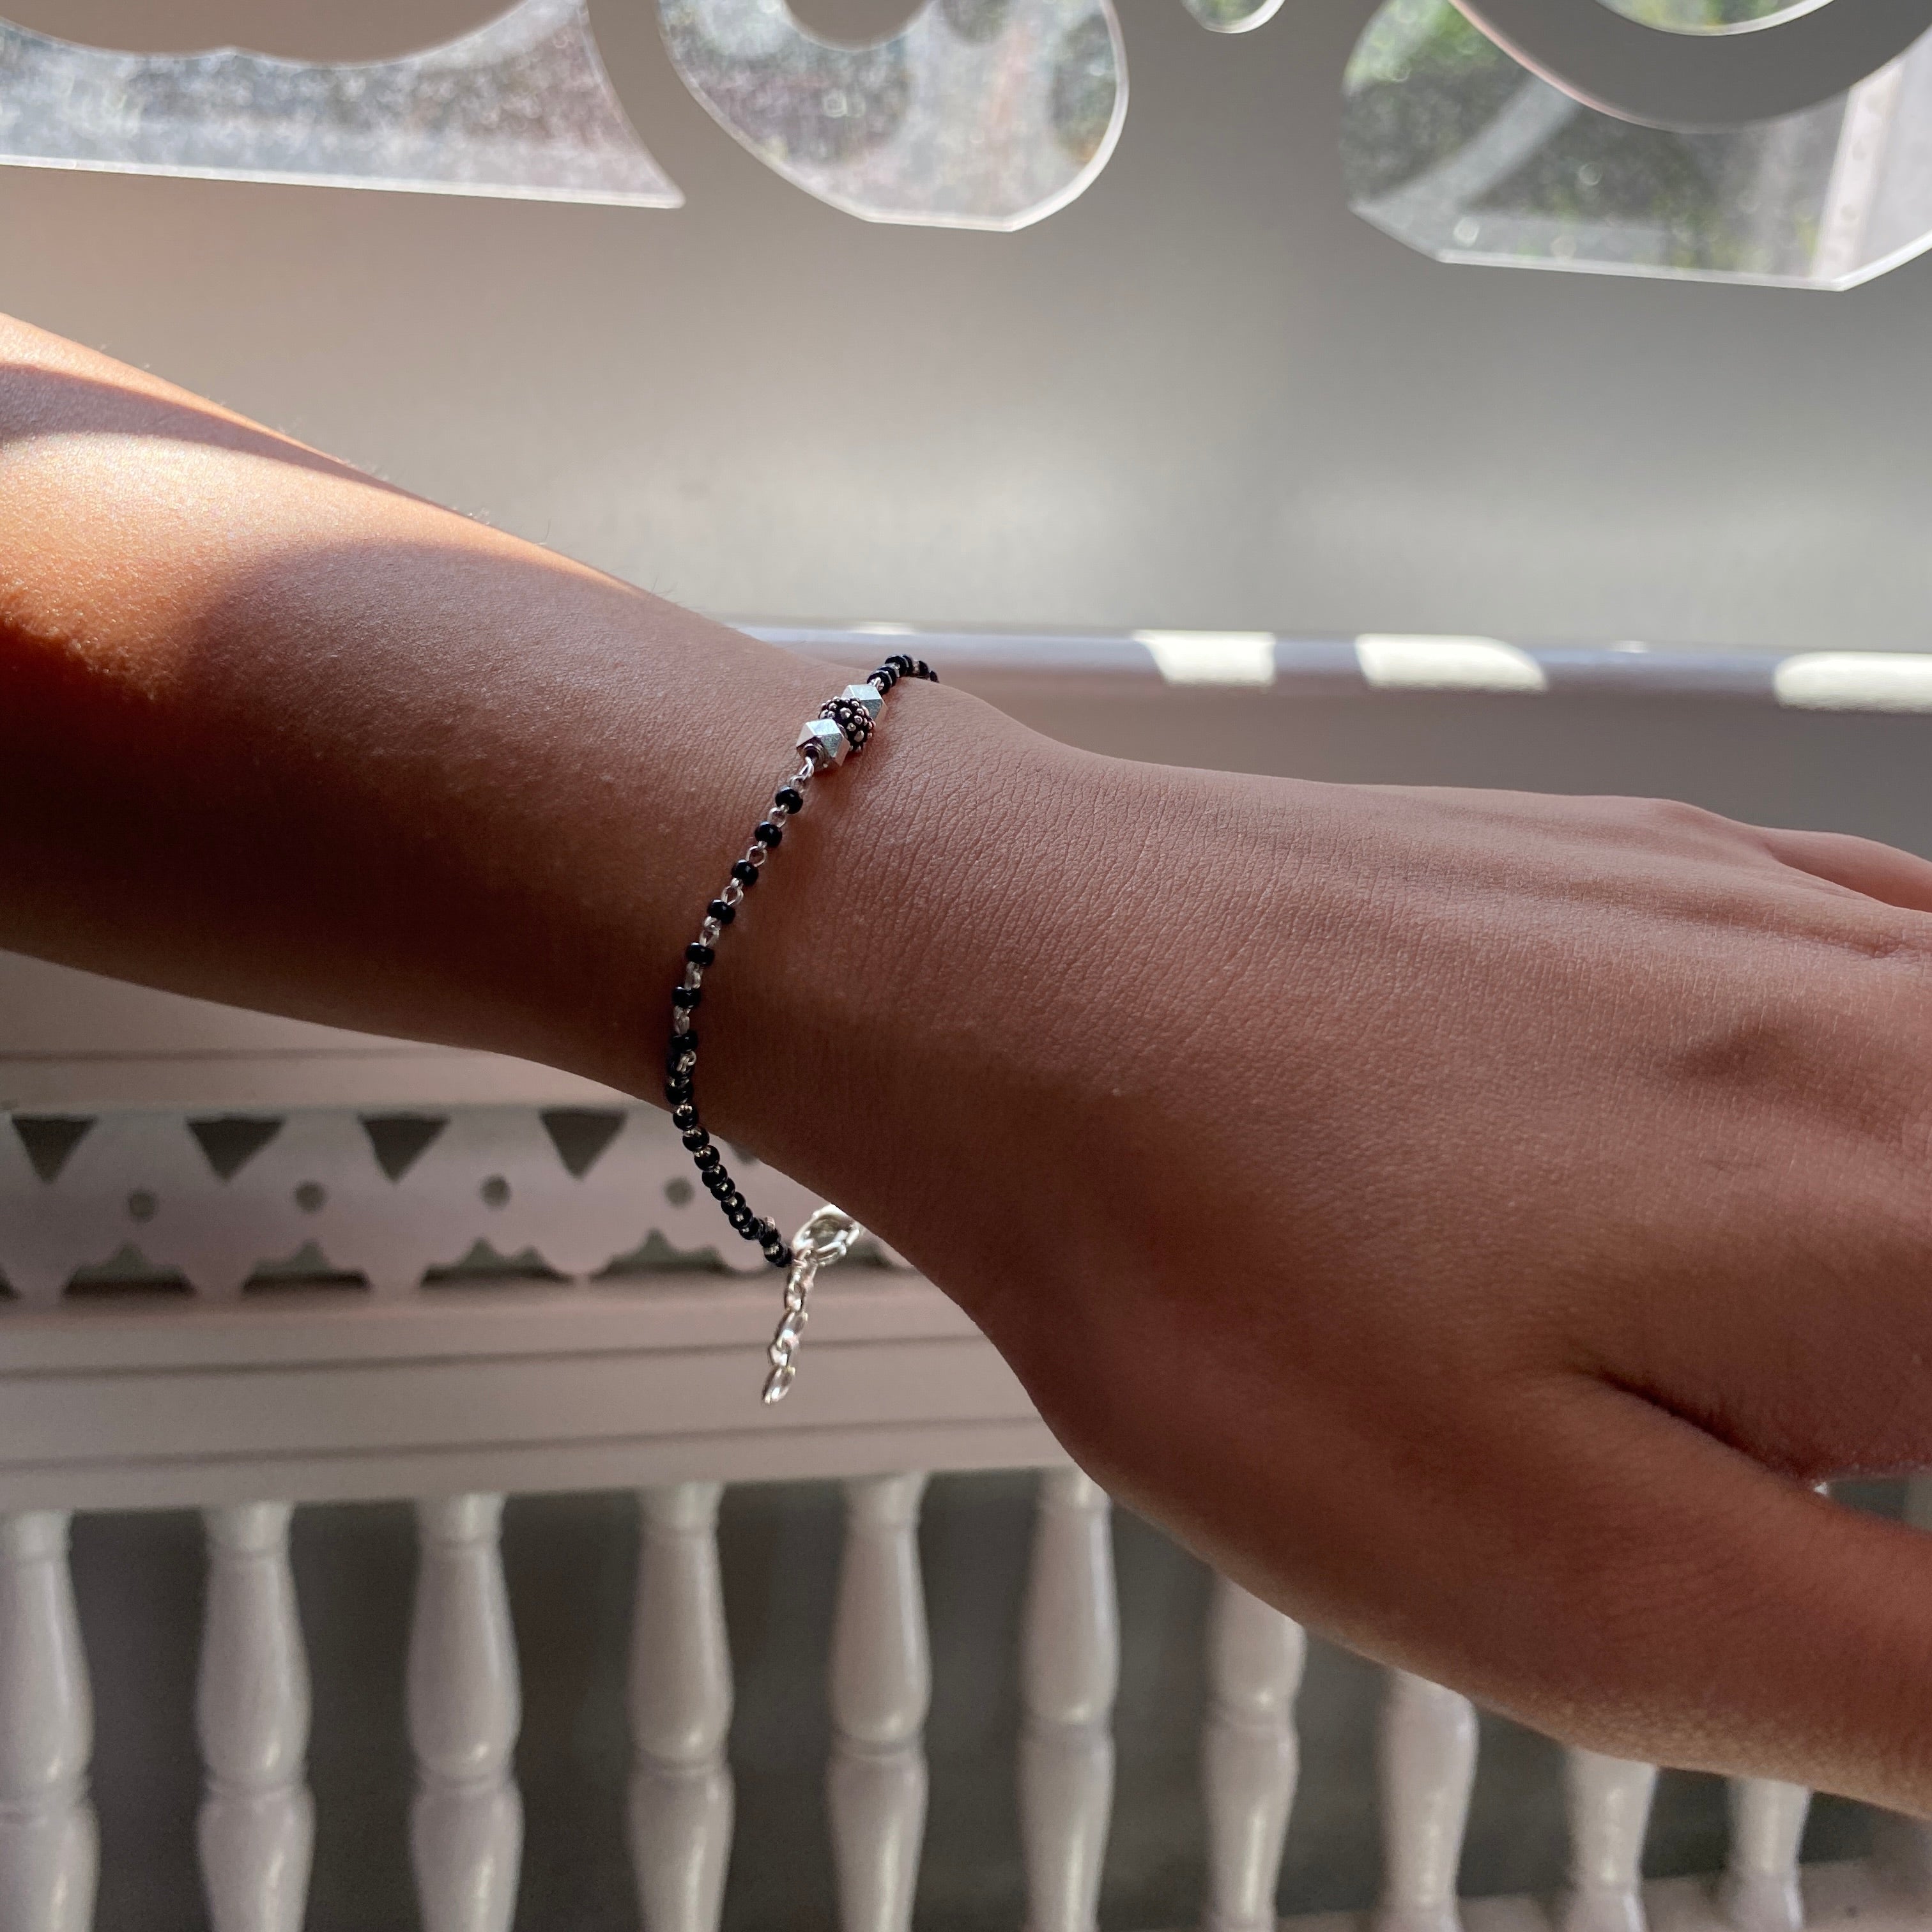 a person wearing a bracelet with a cross on it